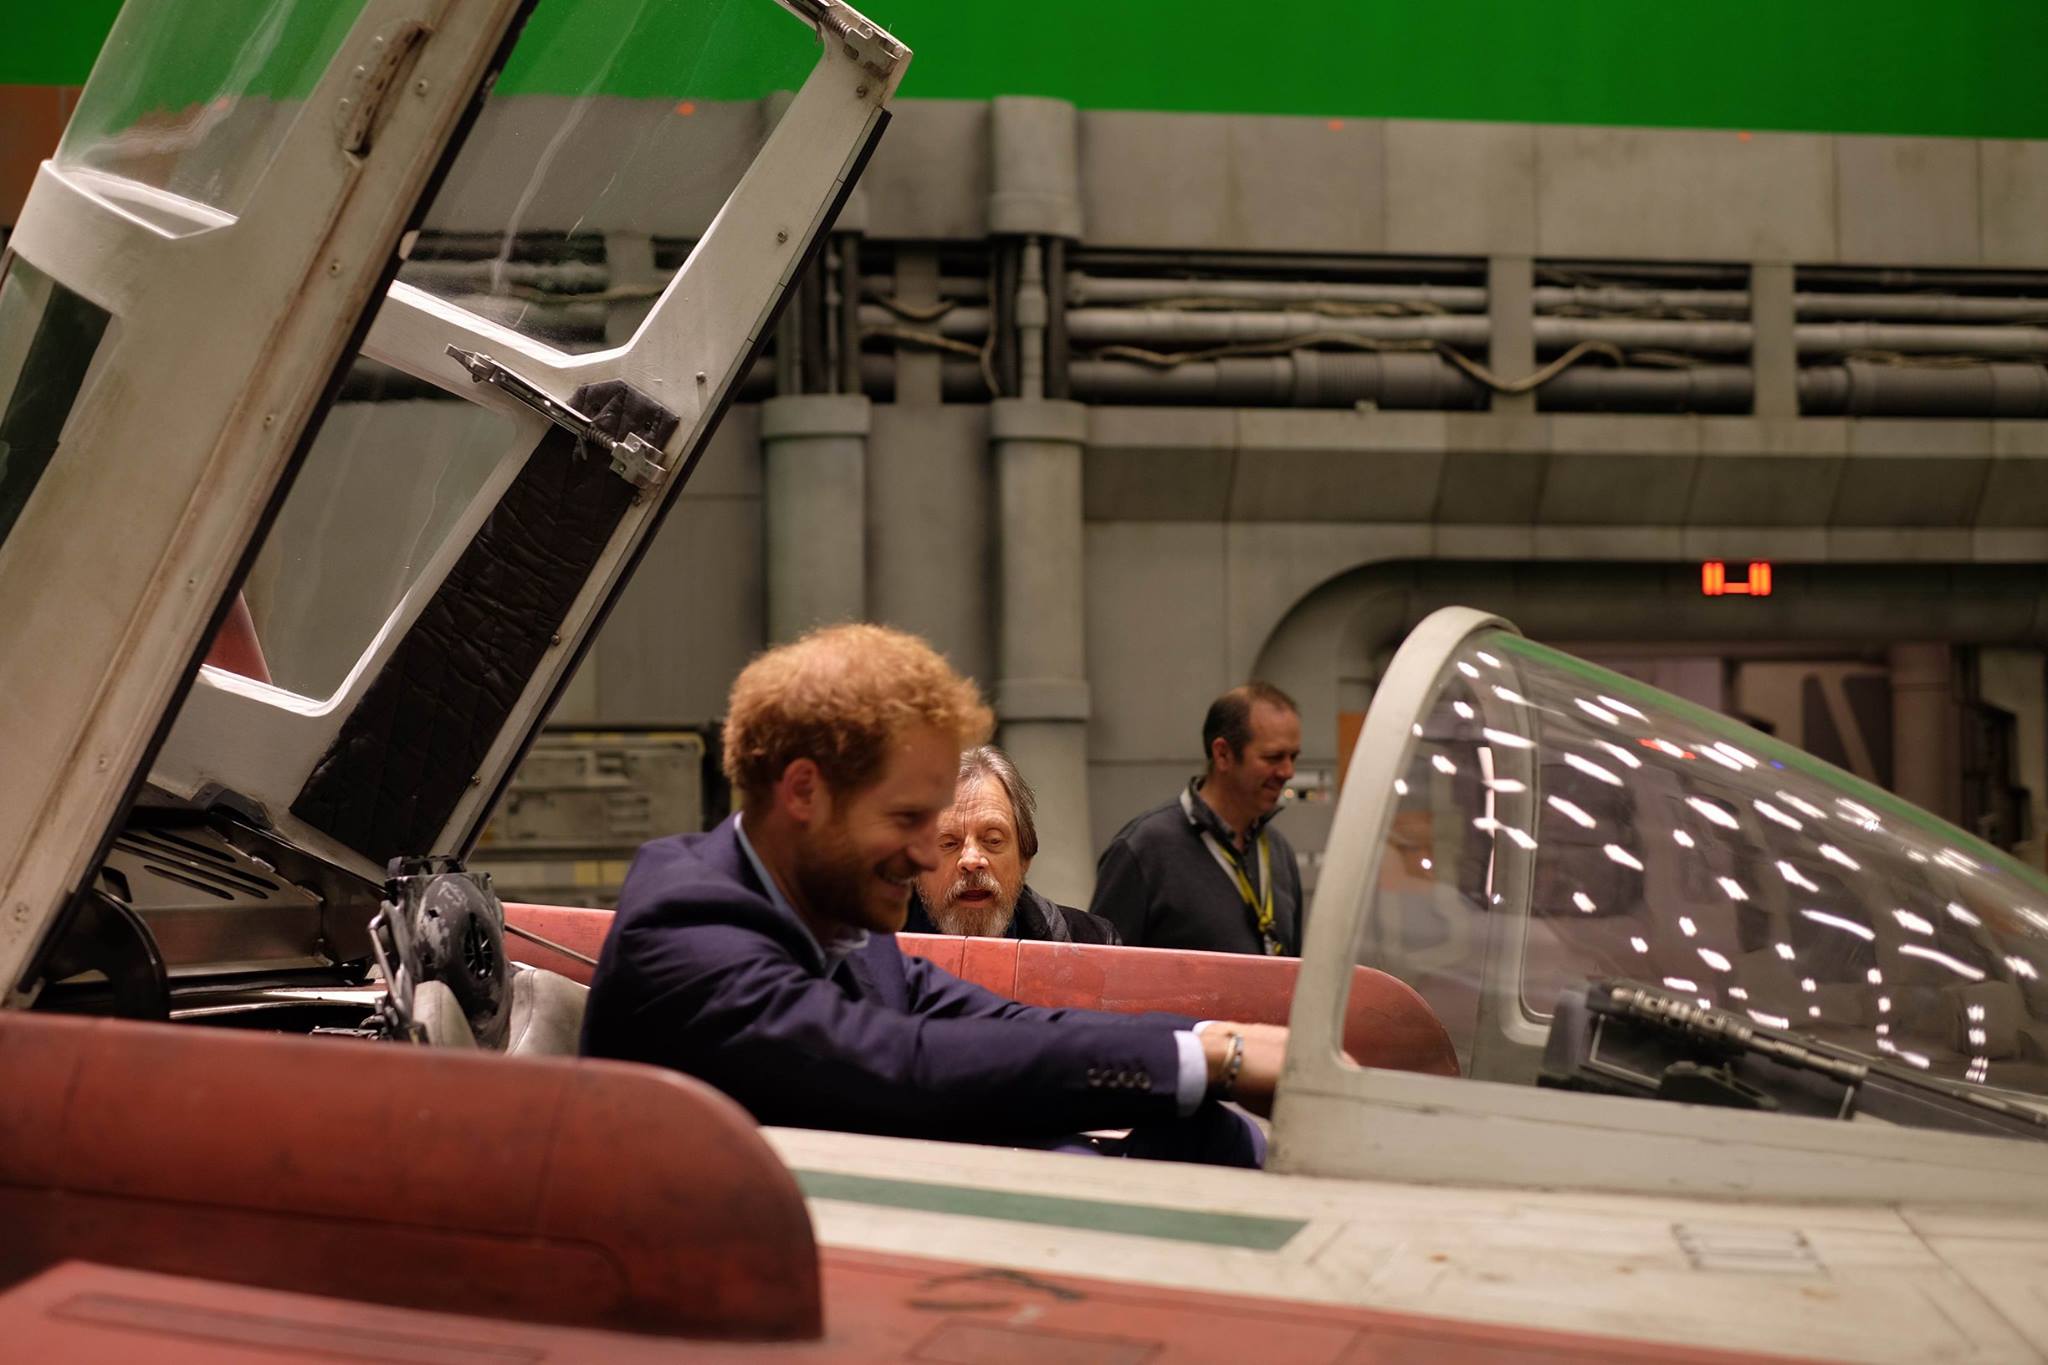 First Look At A Familiar Star Wars Spaceship That’s Returning For Episode VIII